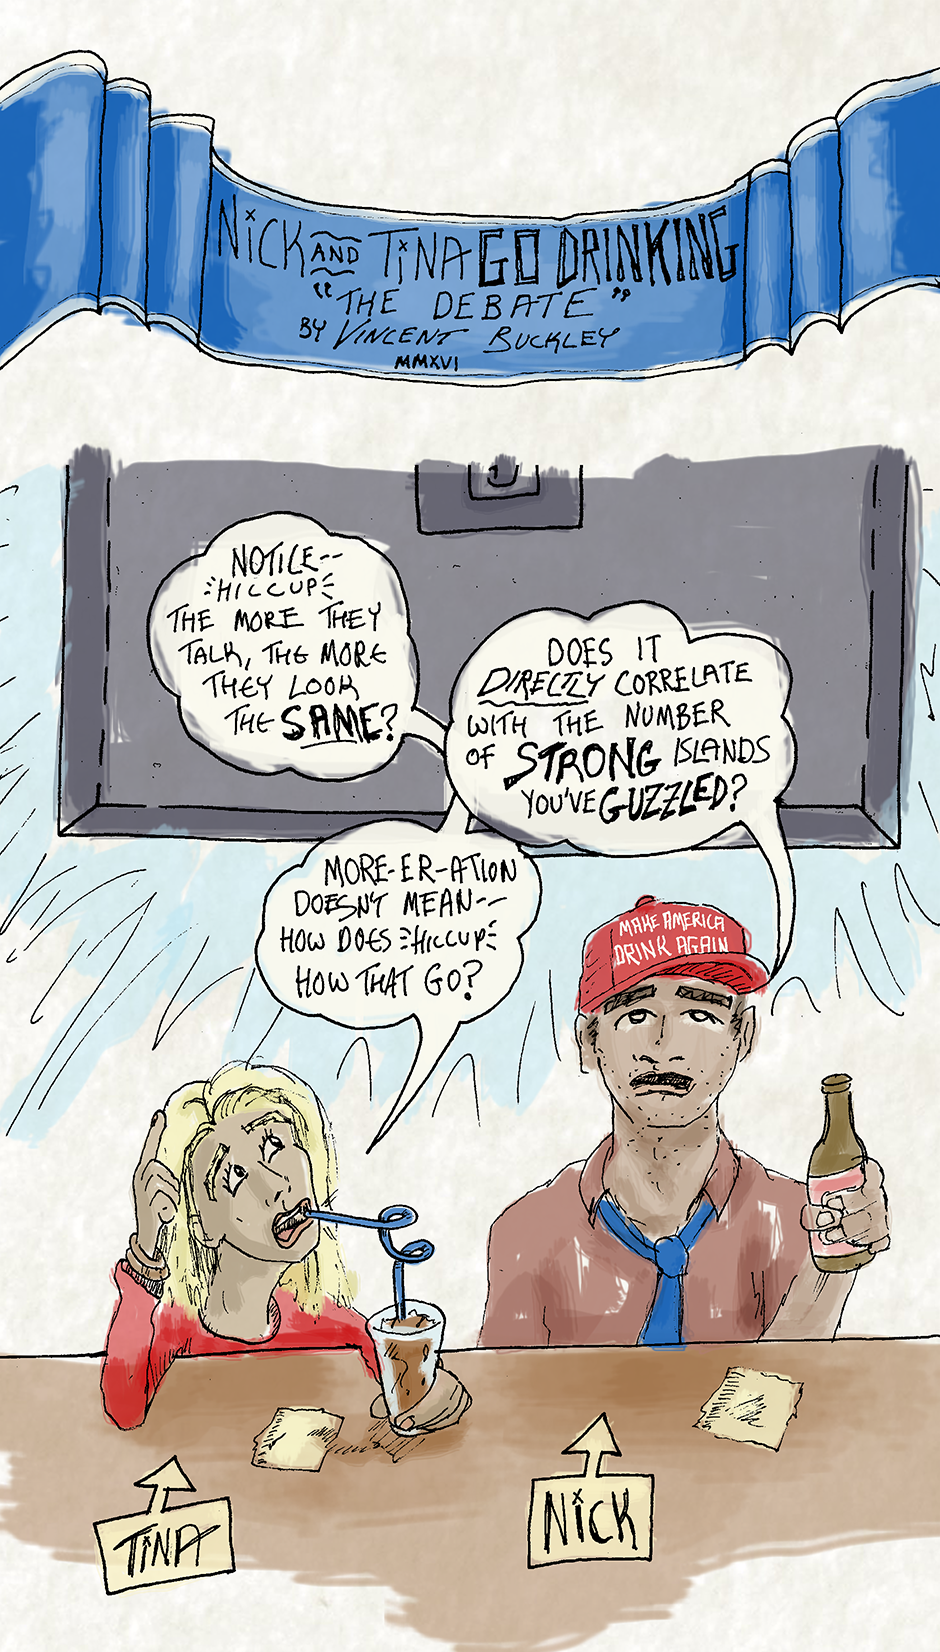 Nick and Tina Go Drinking :: The Debate - image 1